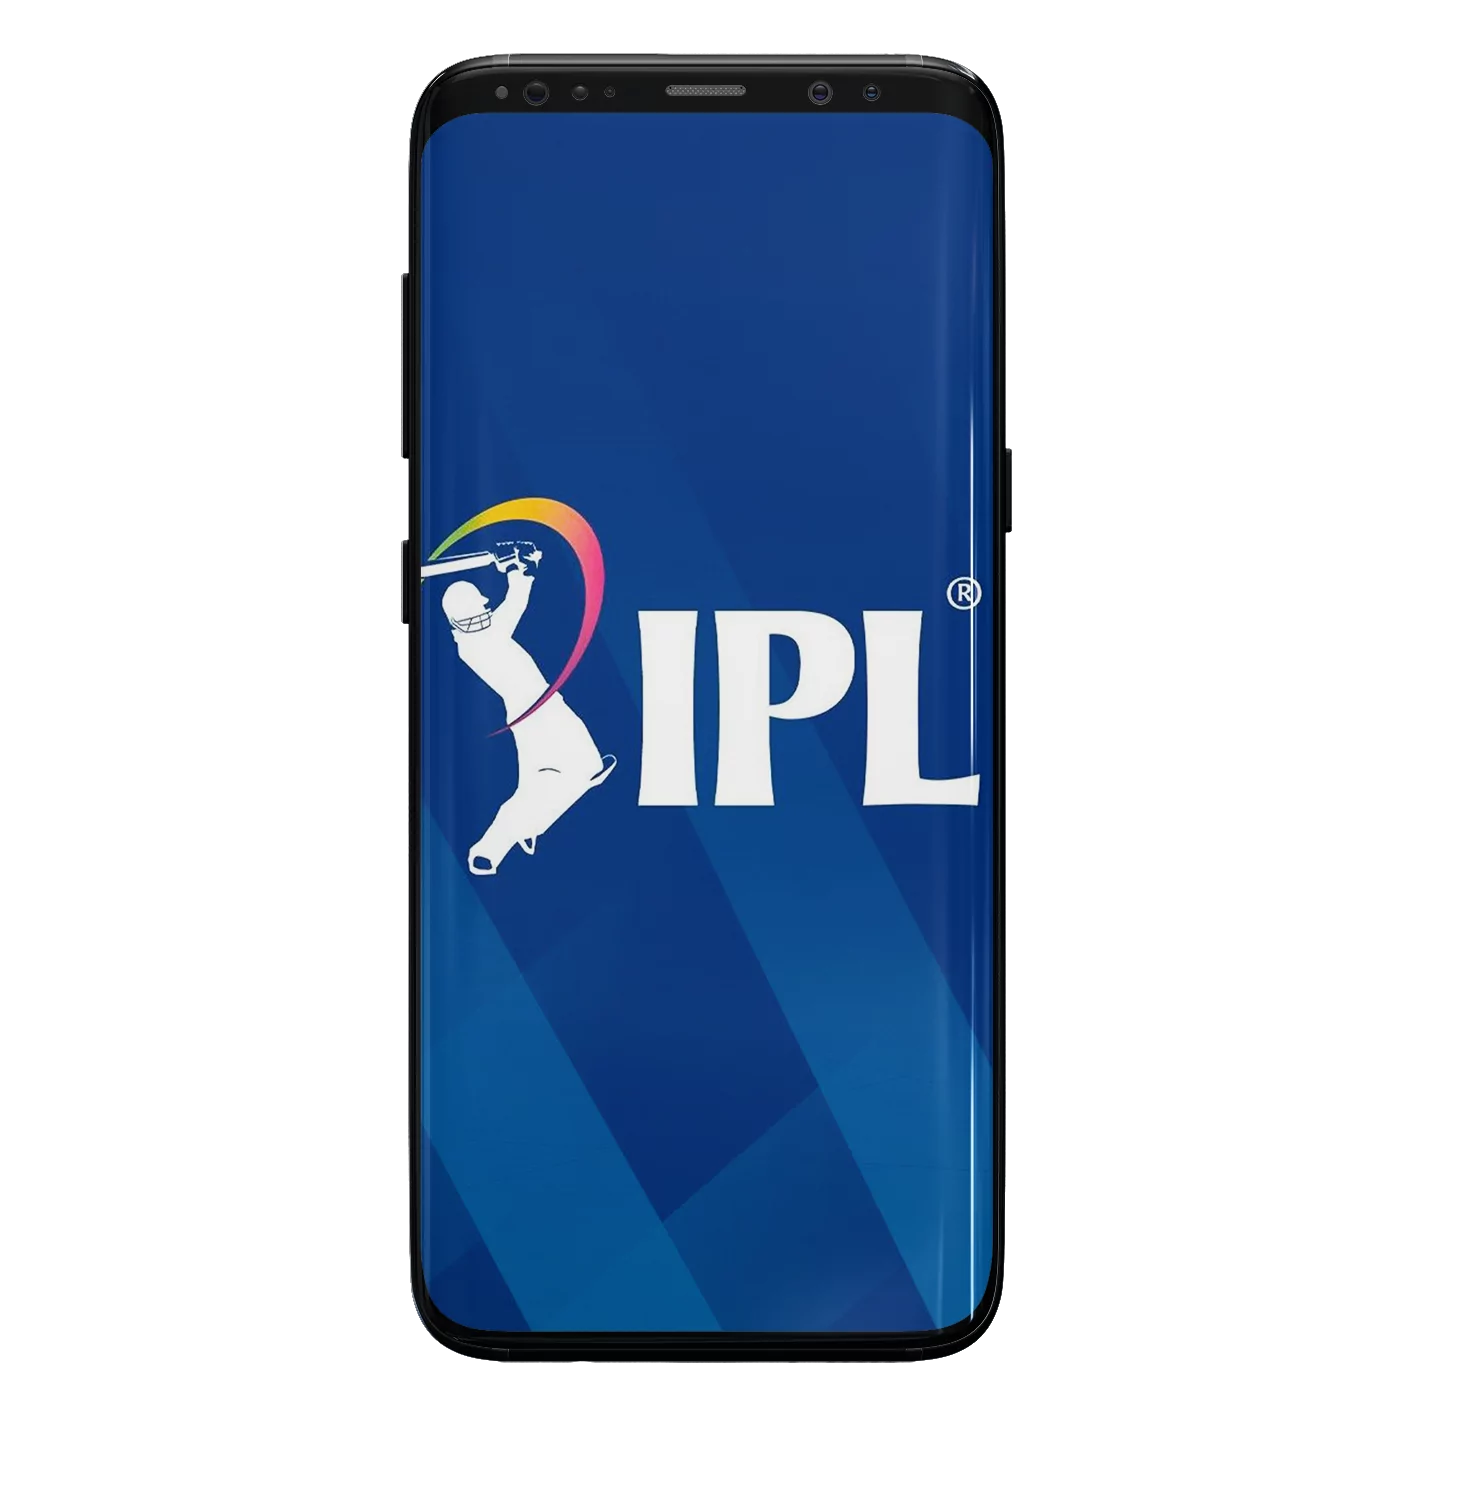 Choose the best Android and iOS app to start betting on IPL events.